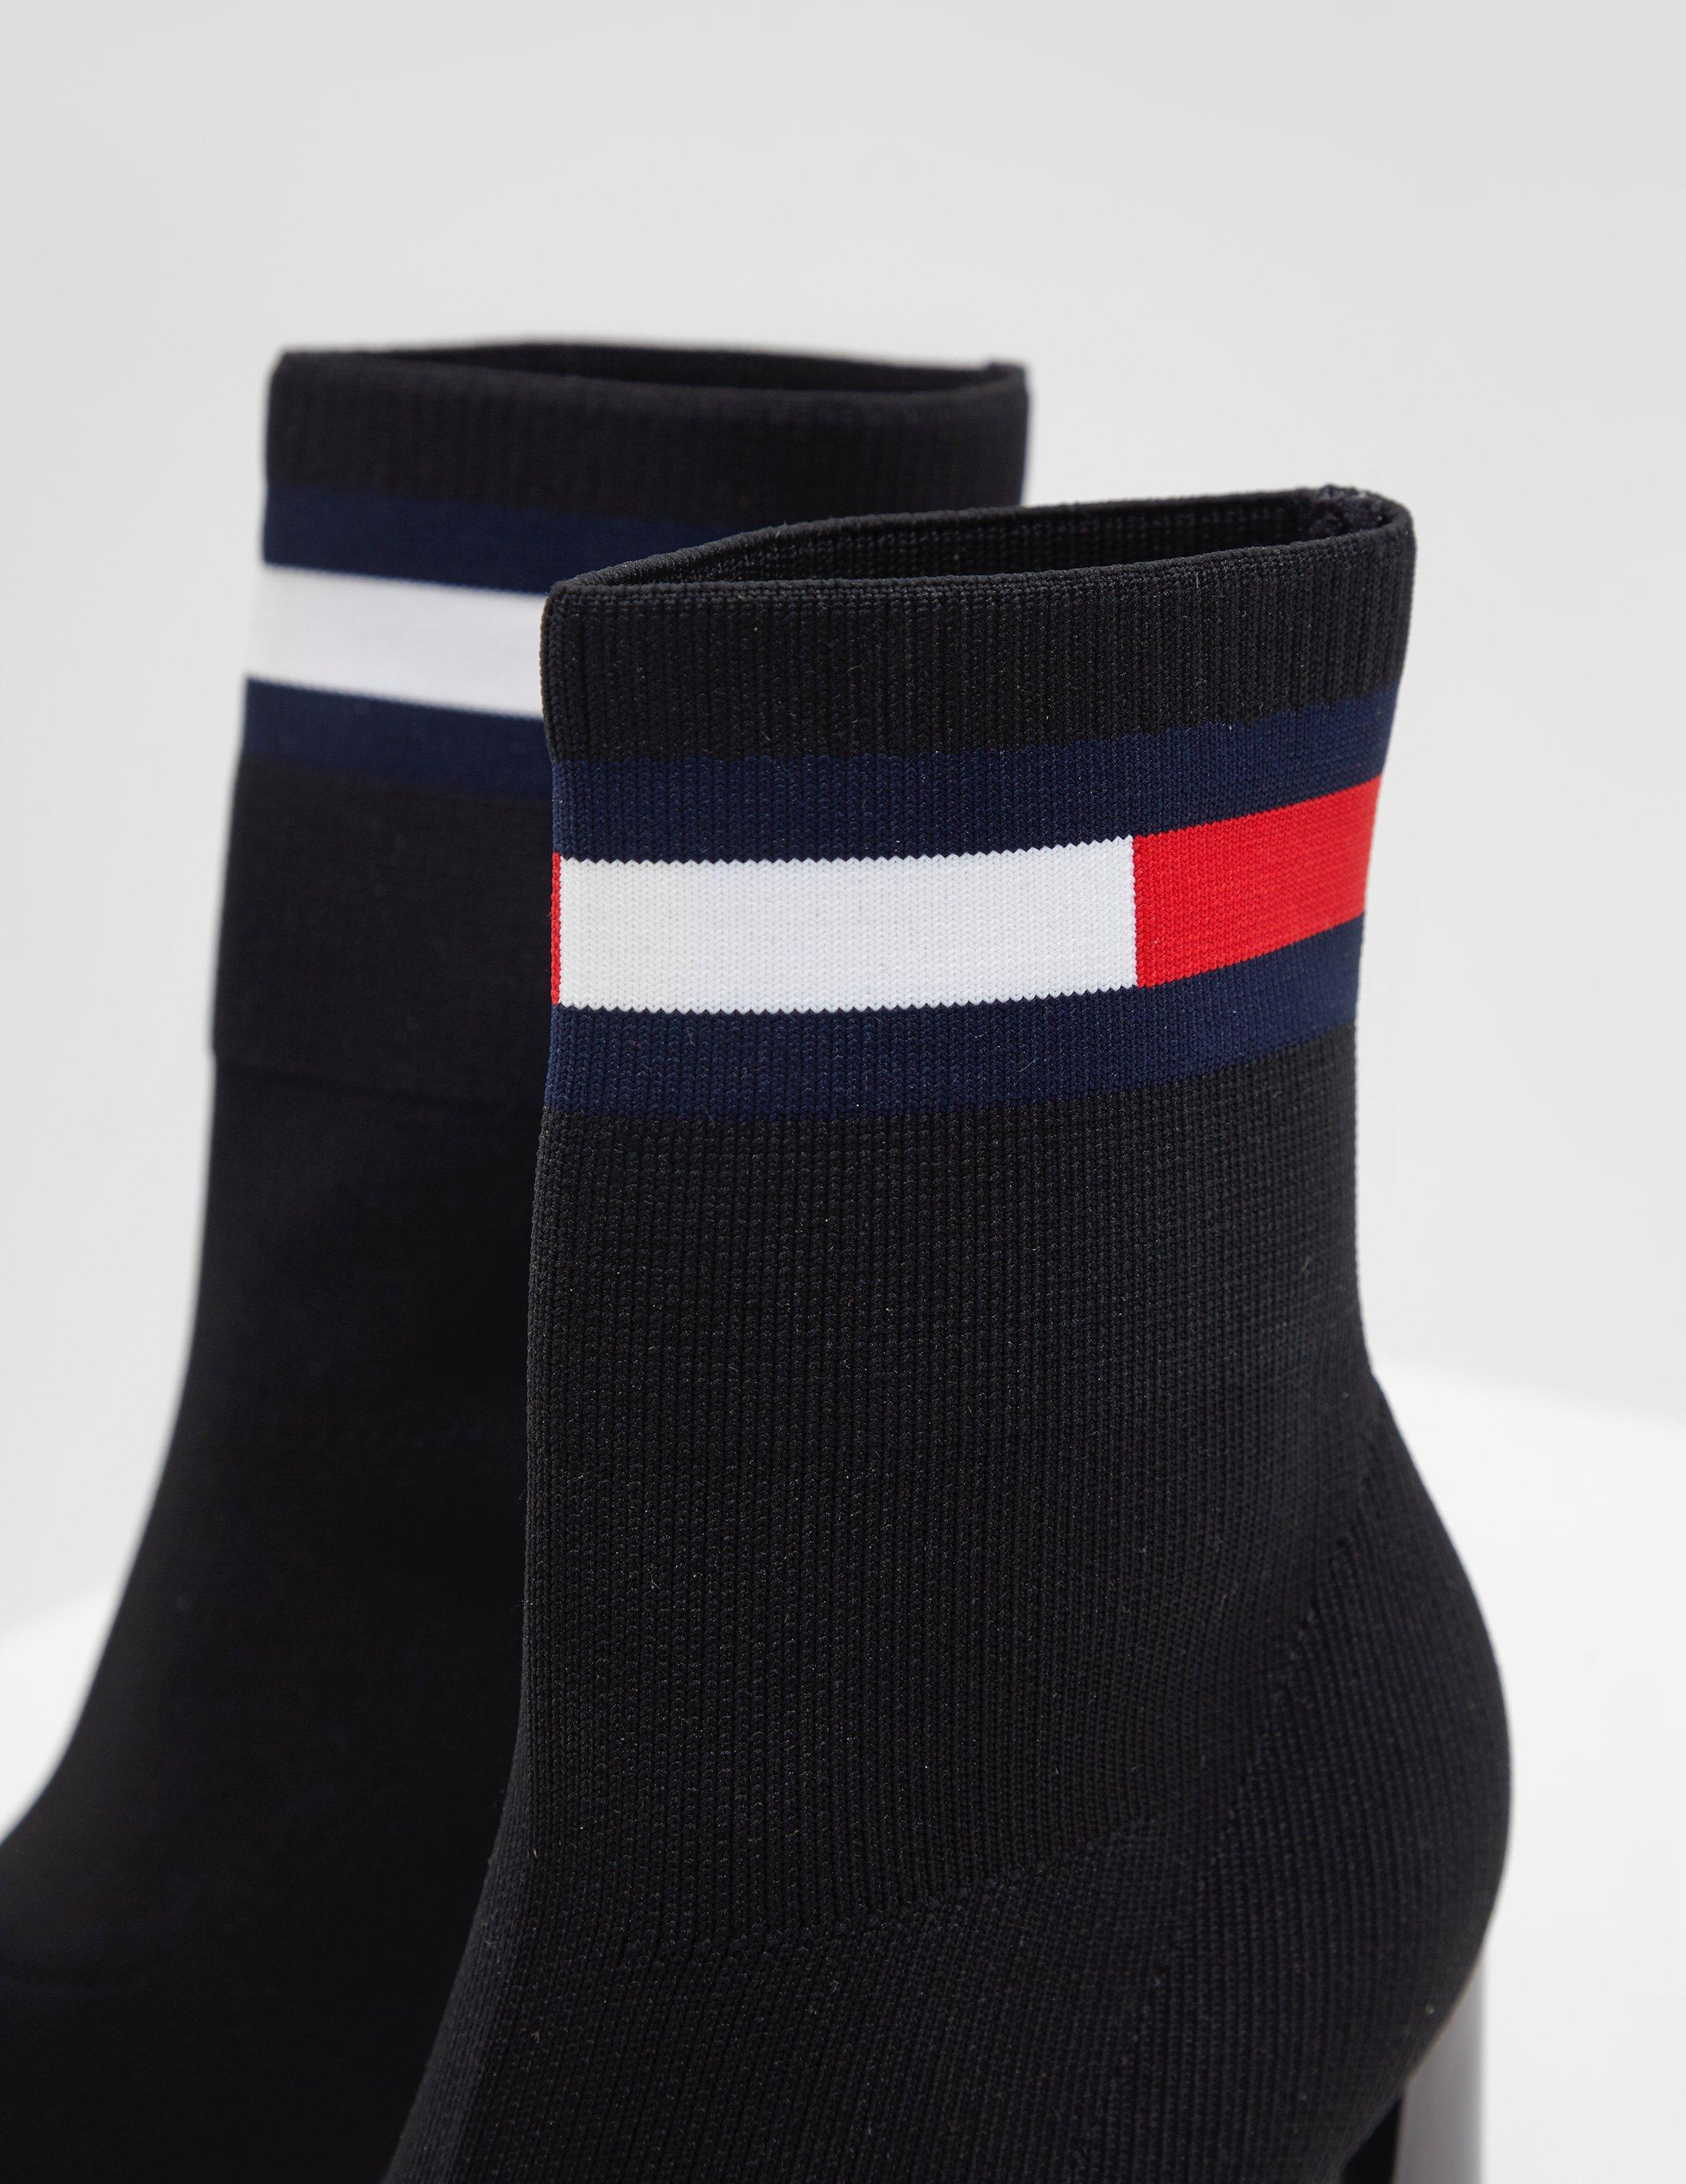 tommy hilfiger black sock boots Cheaper Than Retail Price> Buy Clothing,  Accessories and lifestyle products for women & men -